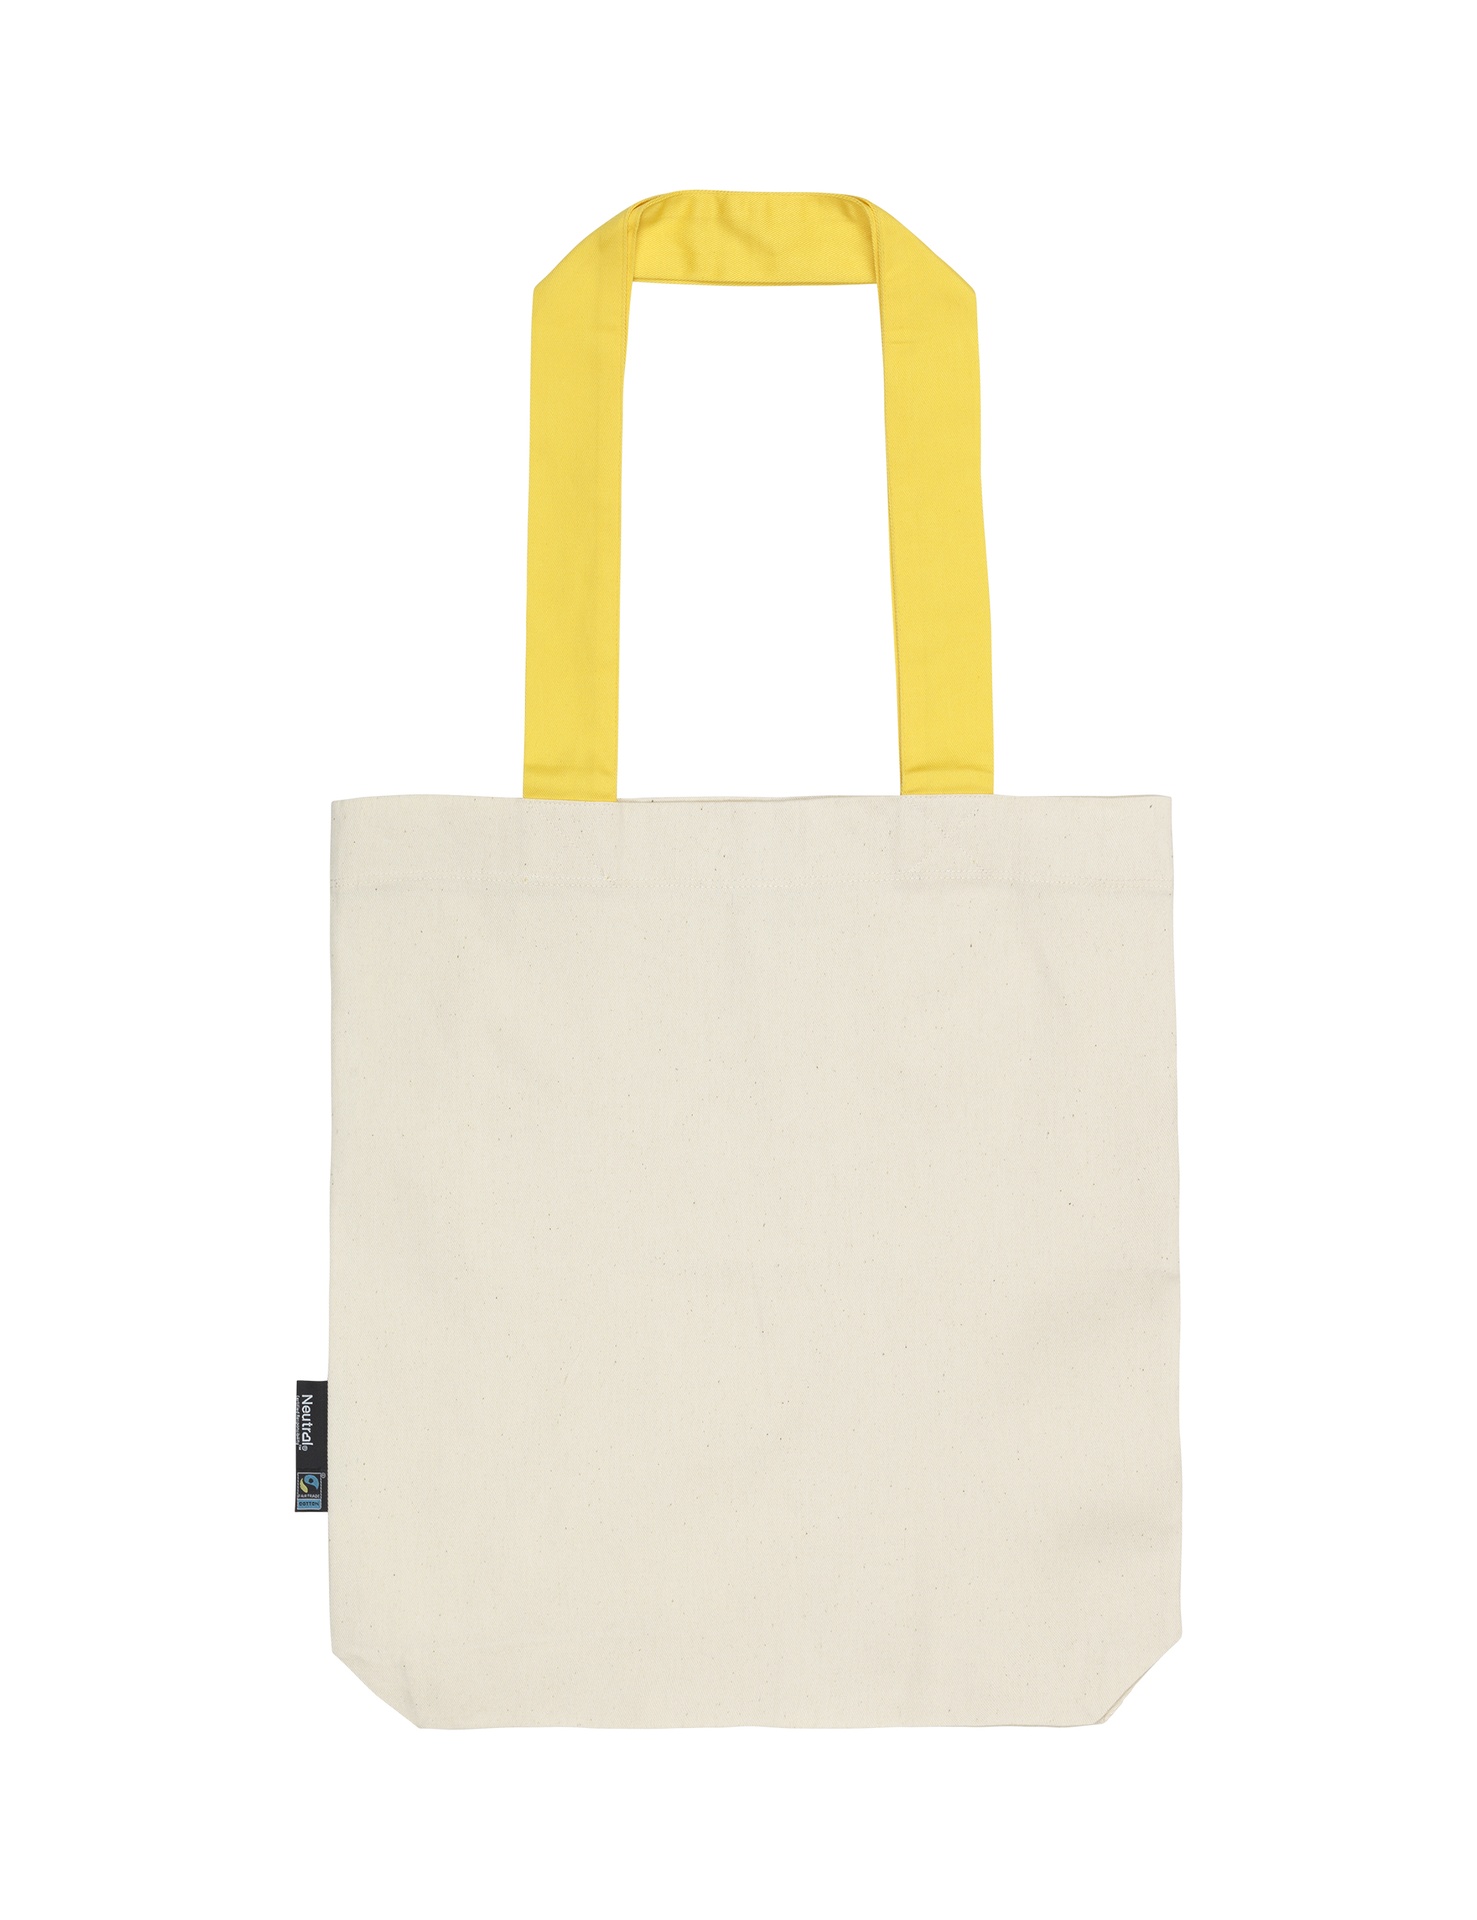 [PR/05780] Twill Bag With Contrast Handles (Nature/Yellow 98)